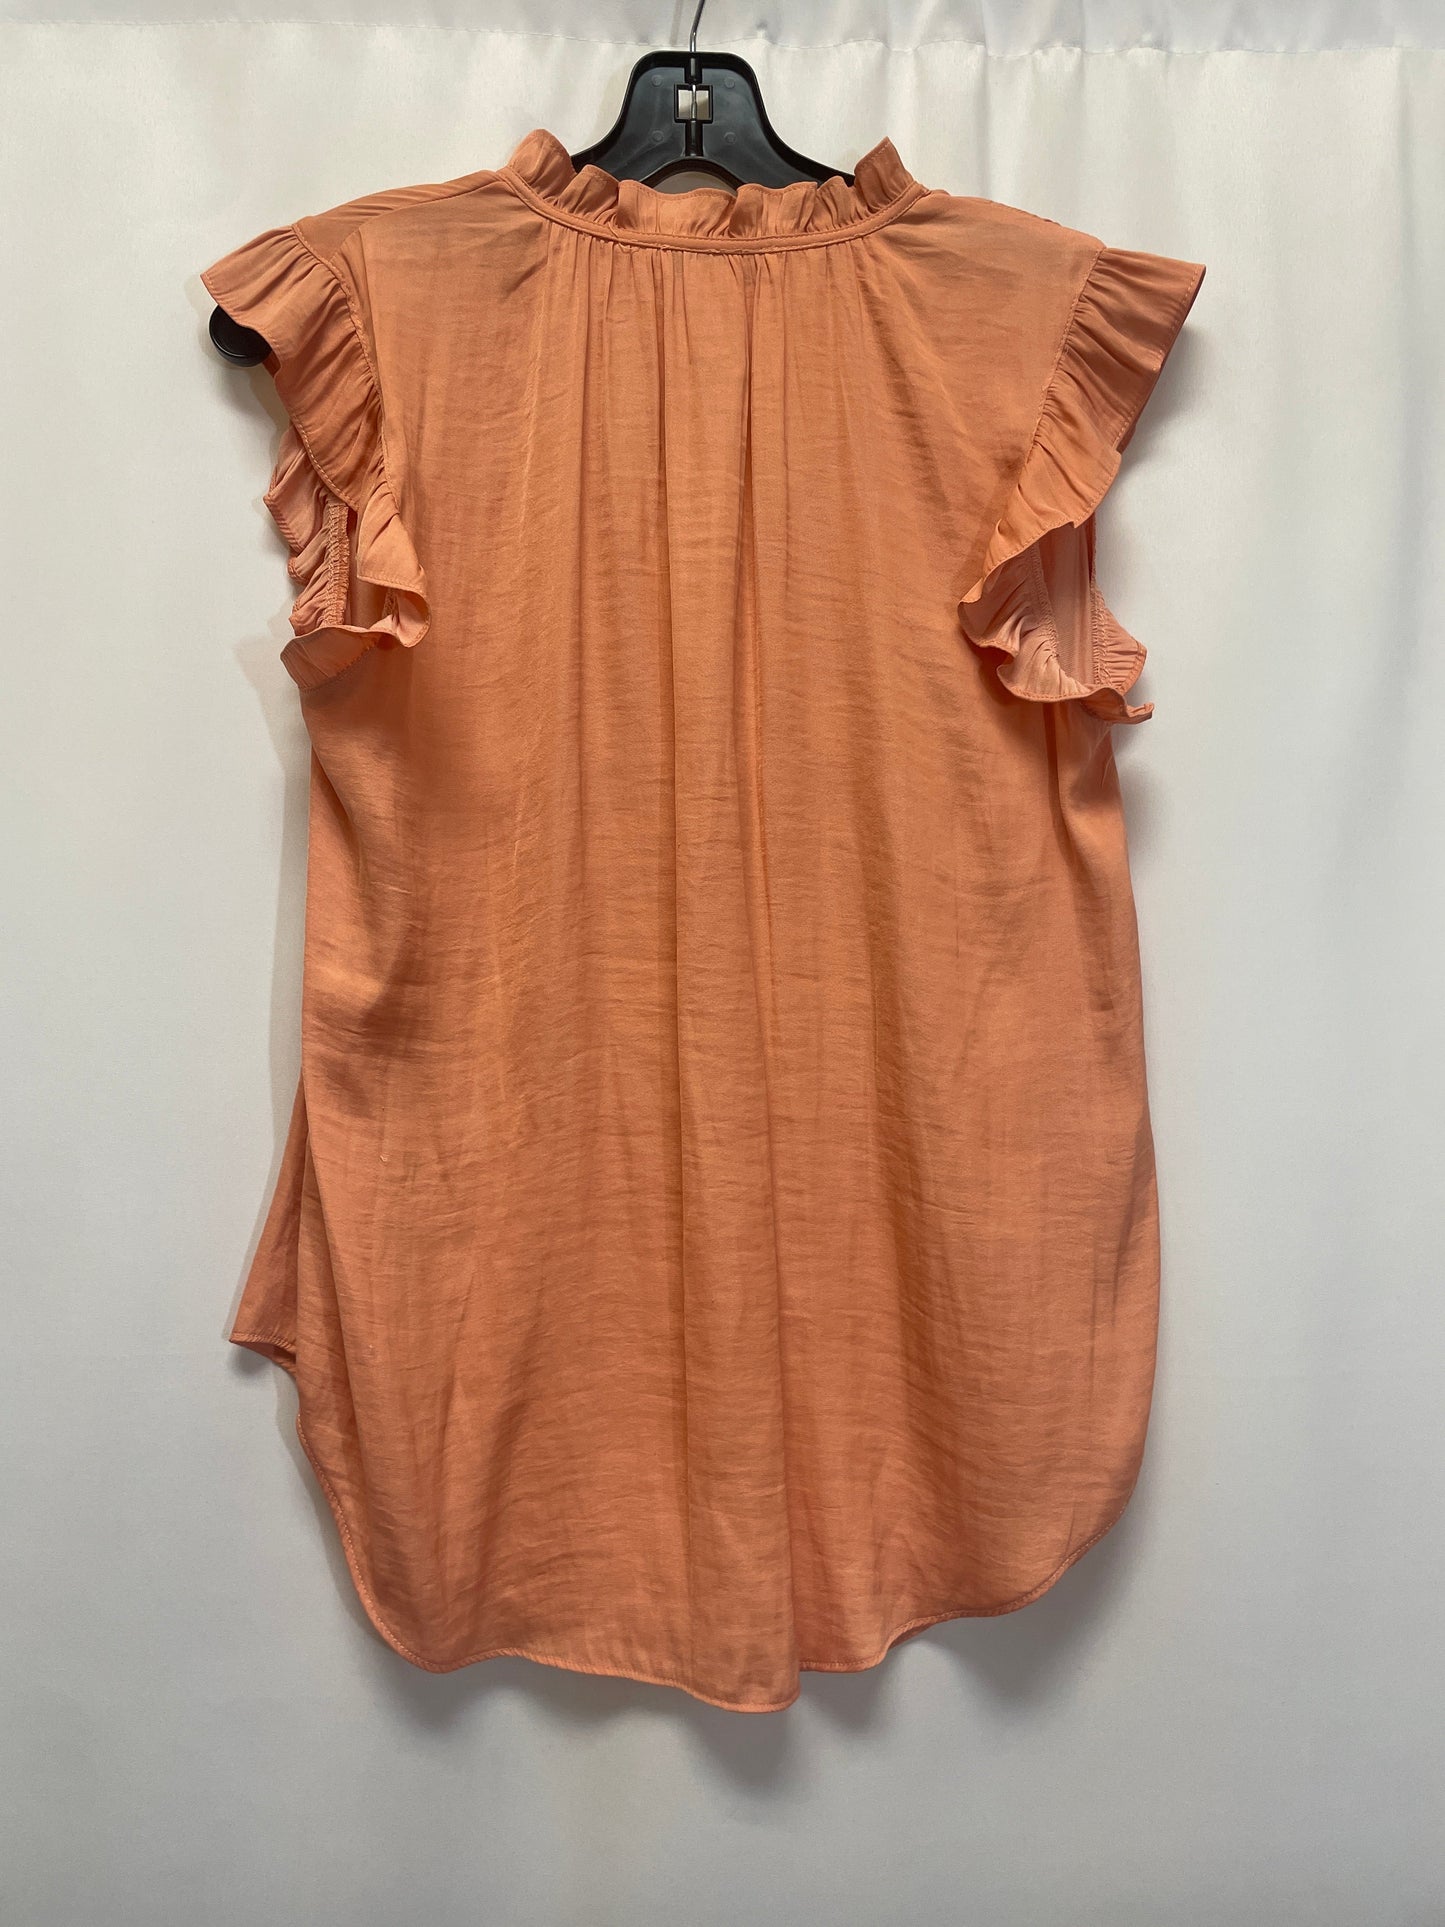 Peach Top Short Sleeve Cupcakes And Cashmere, Size S